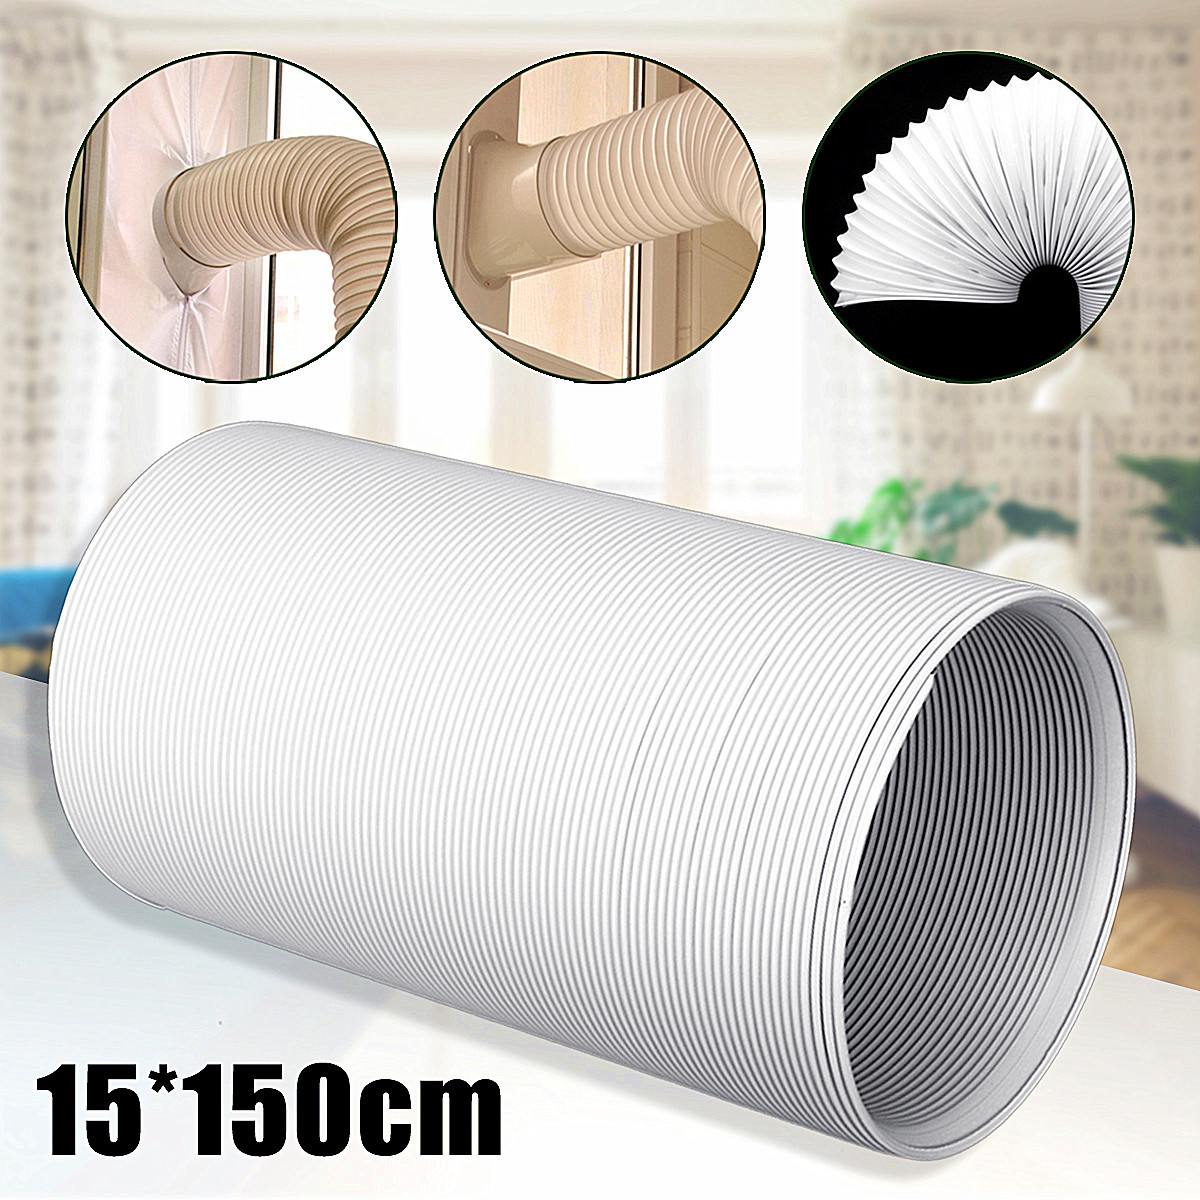 59 Inch Universal Exhaust Hose Tube for Portable Air Conditioner Exhaust Hose 5 Inch Vent Hose Part 